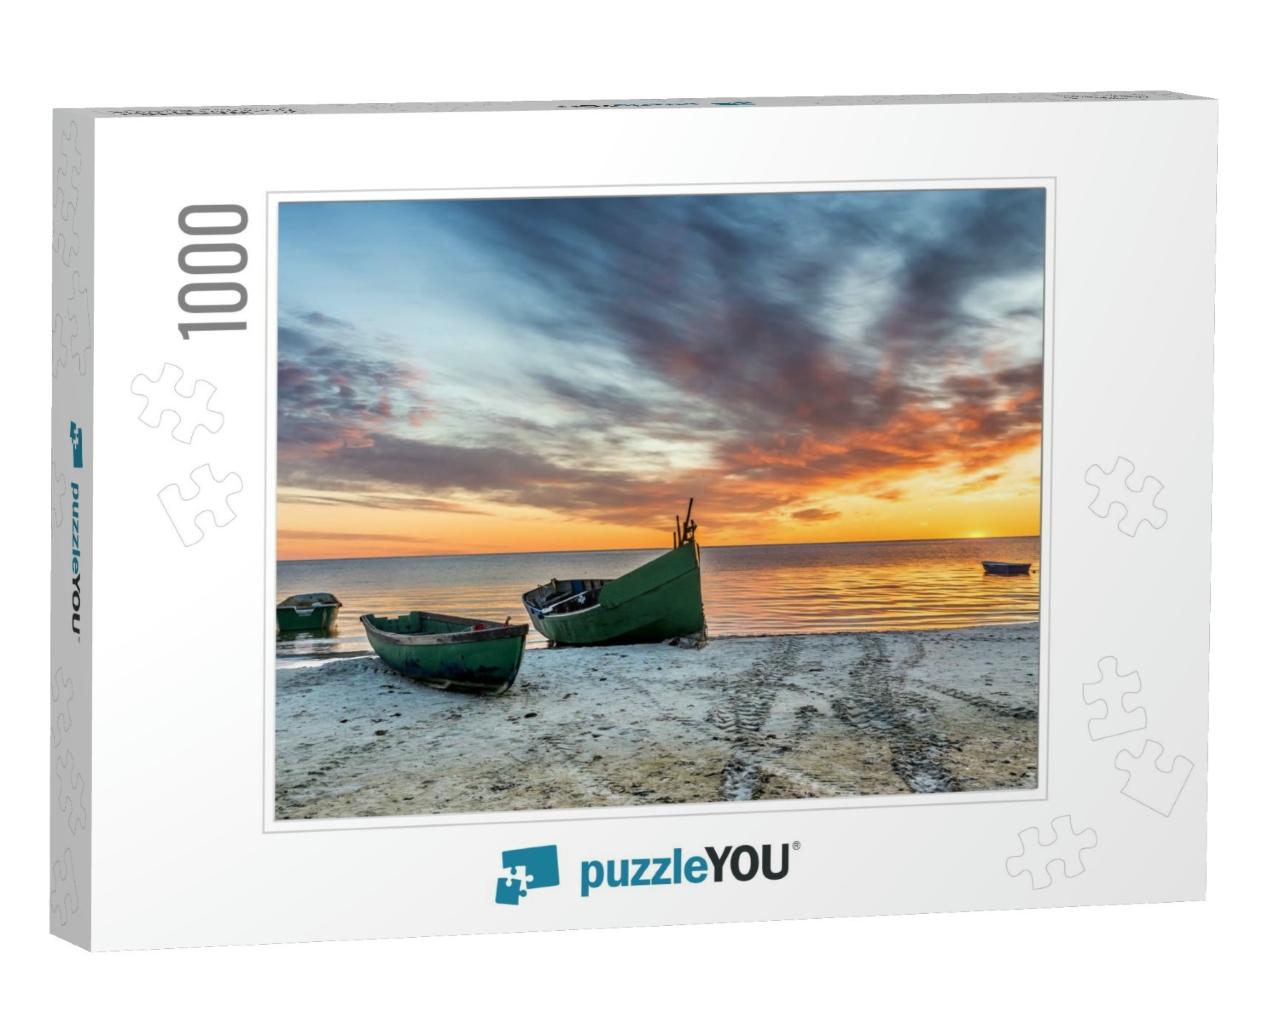 Anchored Fishing Boat on Sandy Beach of the Baltic Sea... Jigsaw Puzzle with 1000 pieces